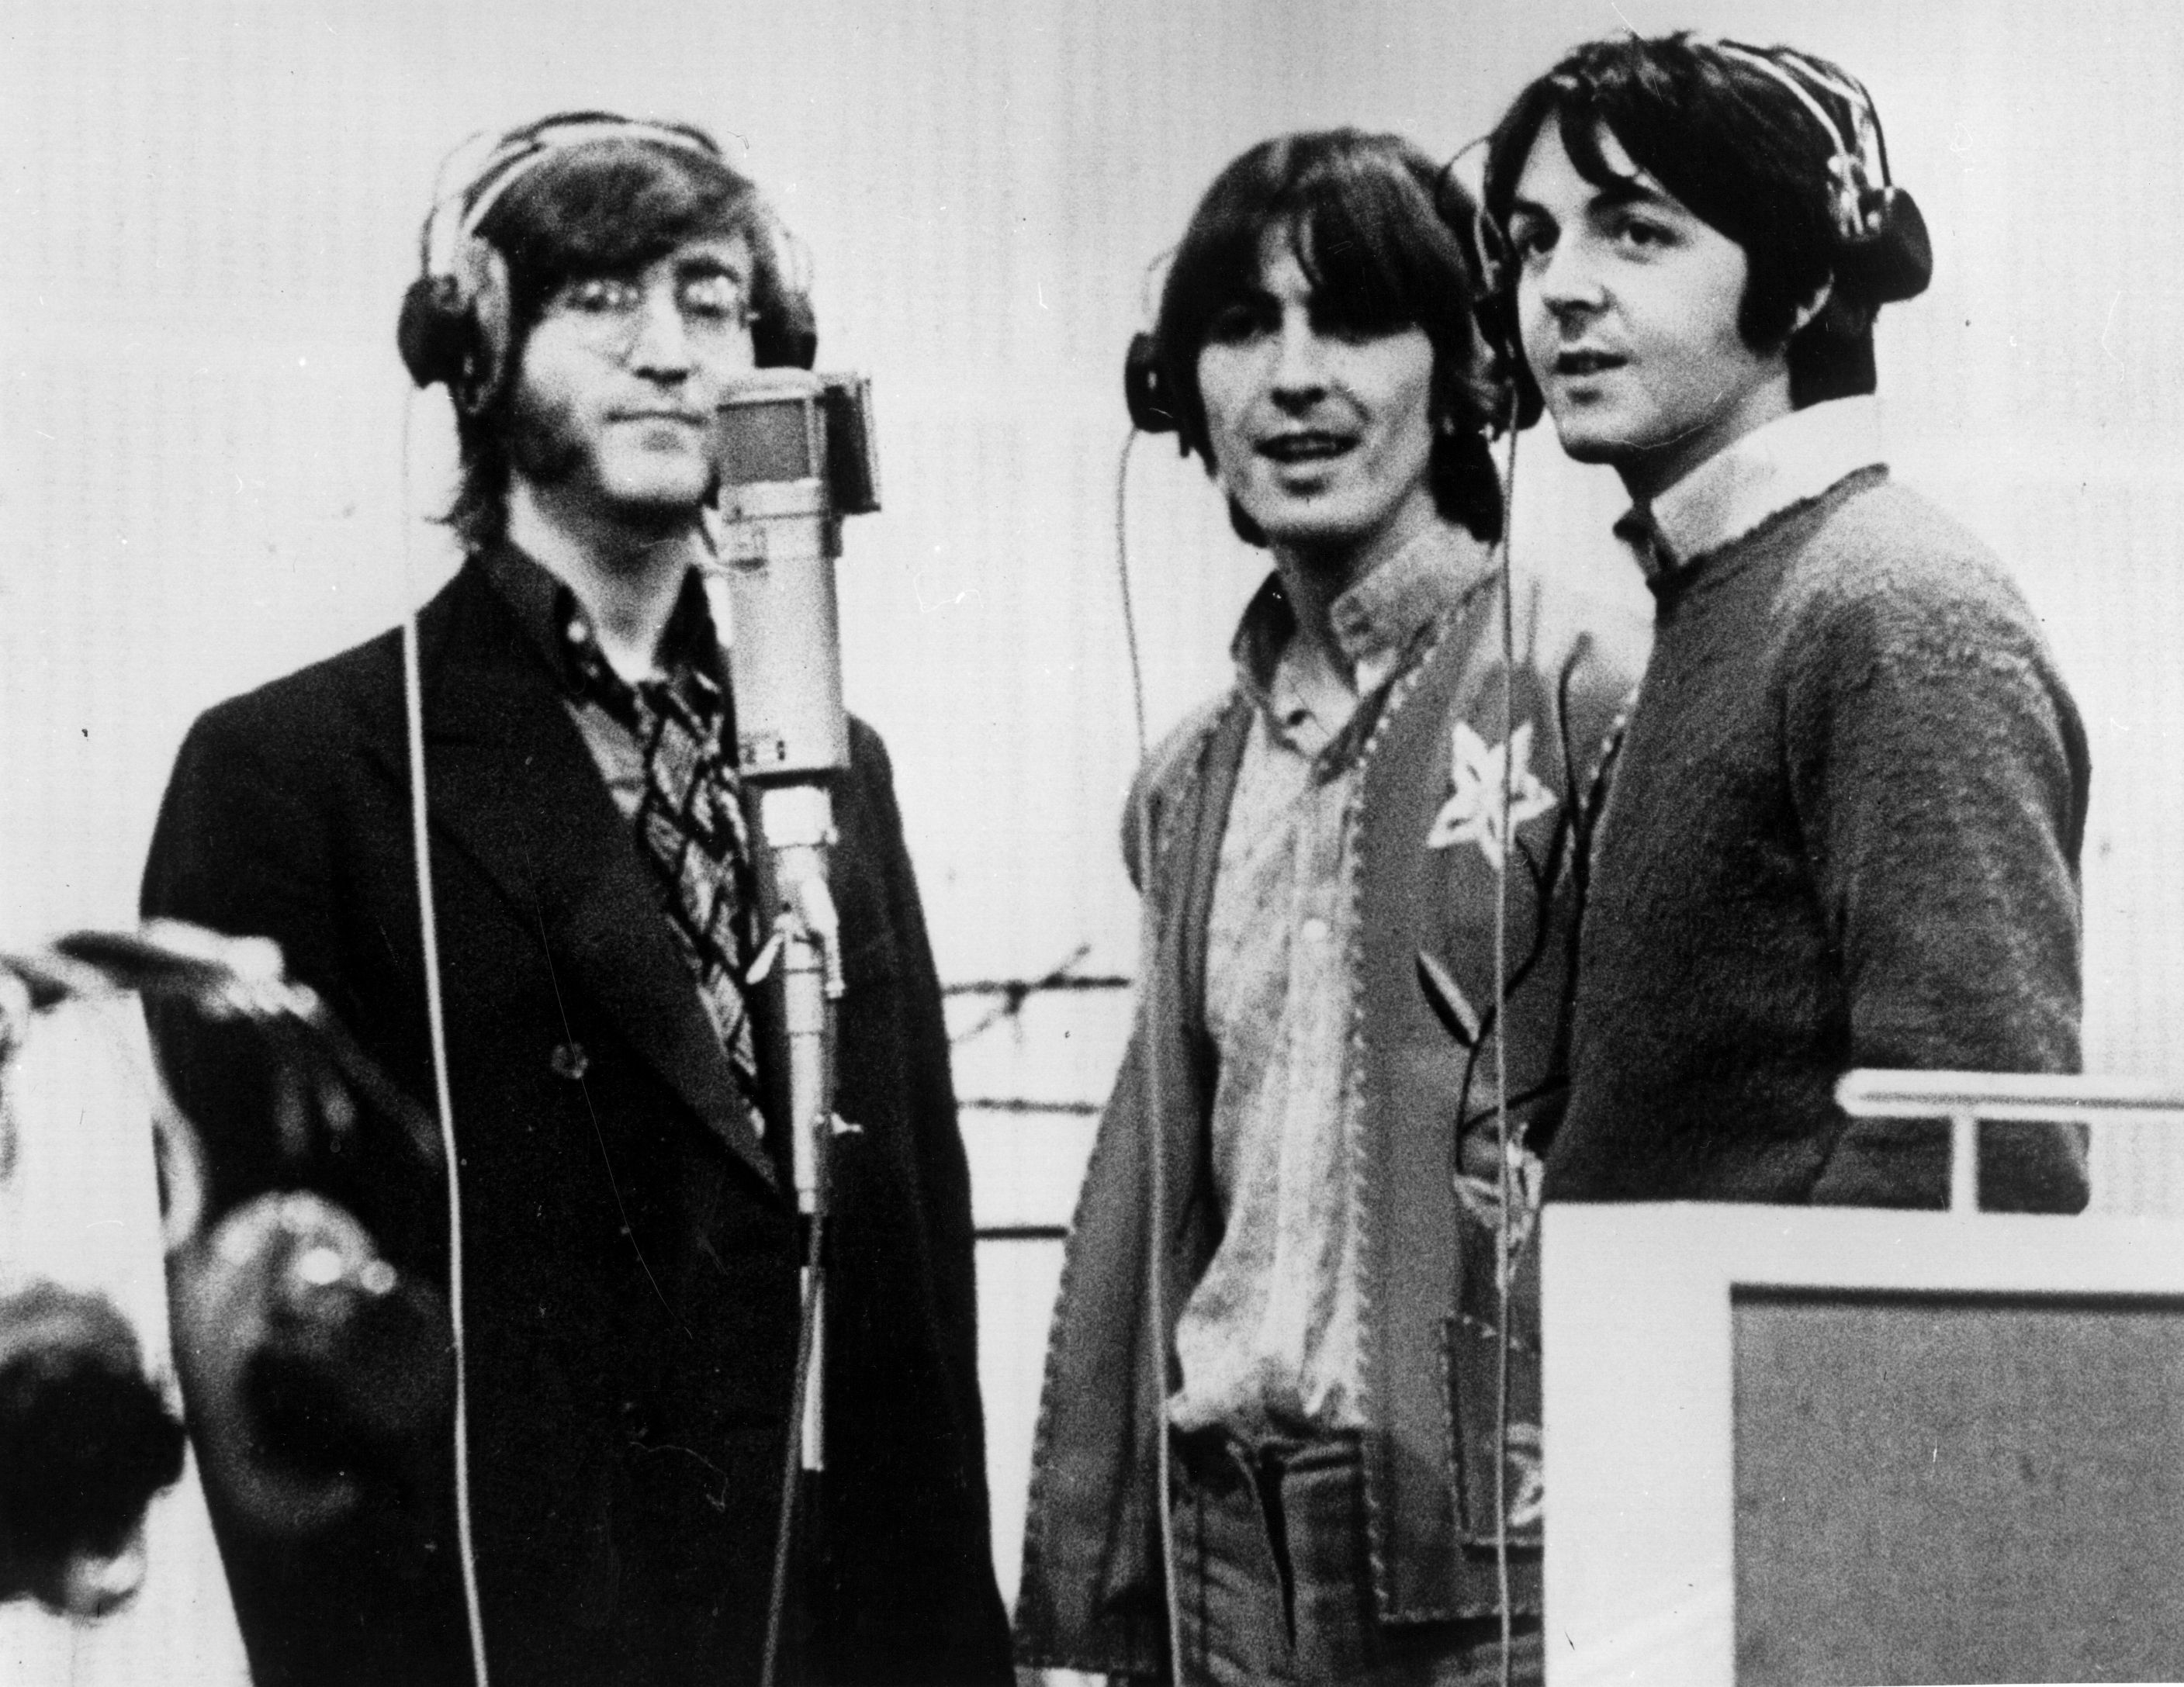 The Beatles' John Lennon, George Harrison, and Paul McCartney standing around a microphone